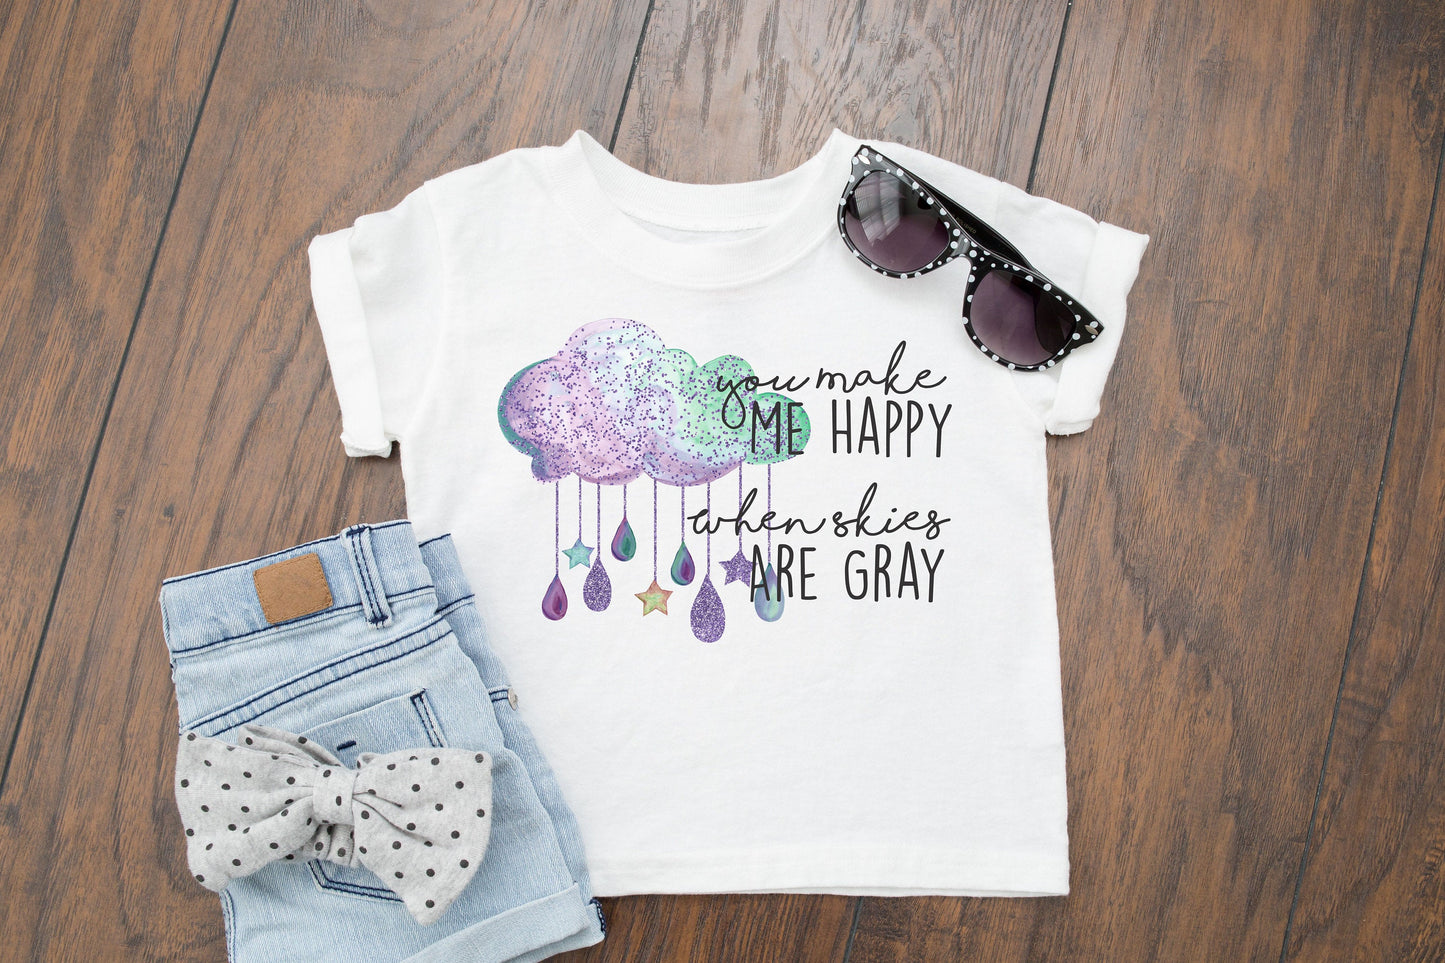 You Make Me Happy When Skies Are Gray Infant or Toddler Shirt or Bodysuit - Rainbow Baby - Storm Cloud Baby Shirt